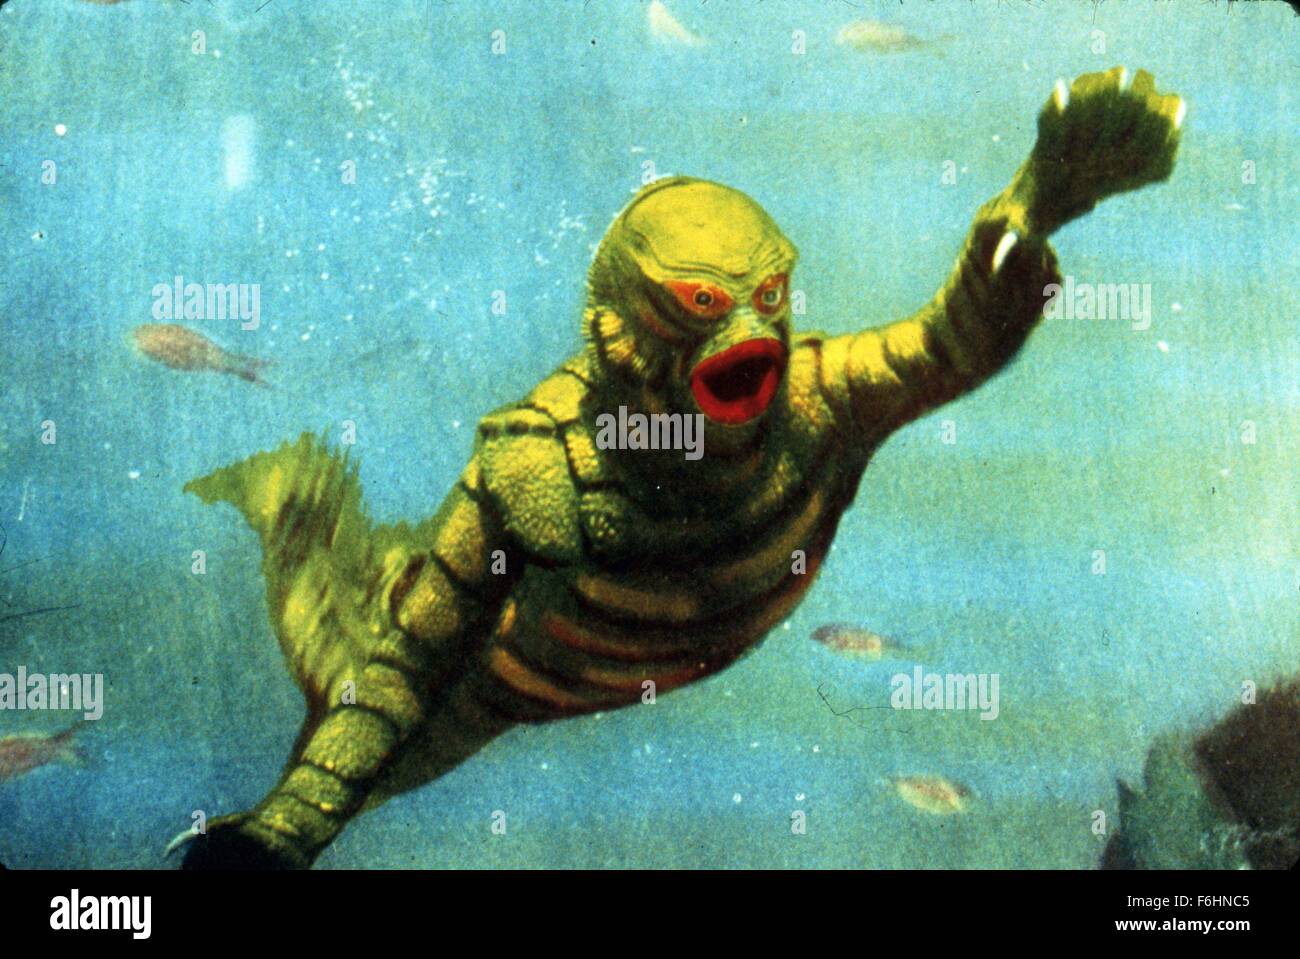 1955, Film Title: REVENGE OF THE CREATURE, Director: JACK ARNOLD, Studio: UNIV, Pictured: ITS & ALIENS! THINGS, UNDERWATER, MONSTER, SEA MONSTER, ATTACKING, GREEN, RIDGE, SCI-FI, HORROR, SWIMMING, FISH. (Credit Image: SNAP) Stock Photo